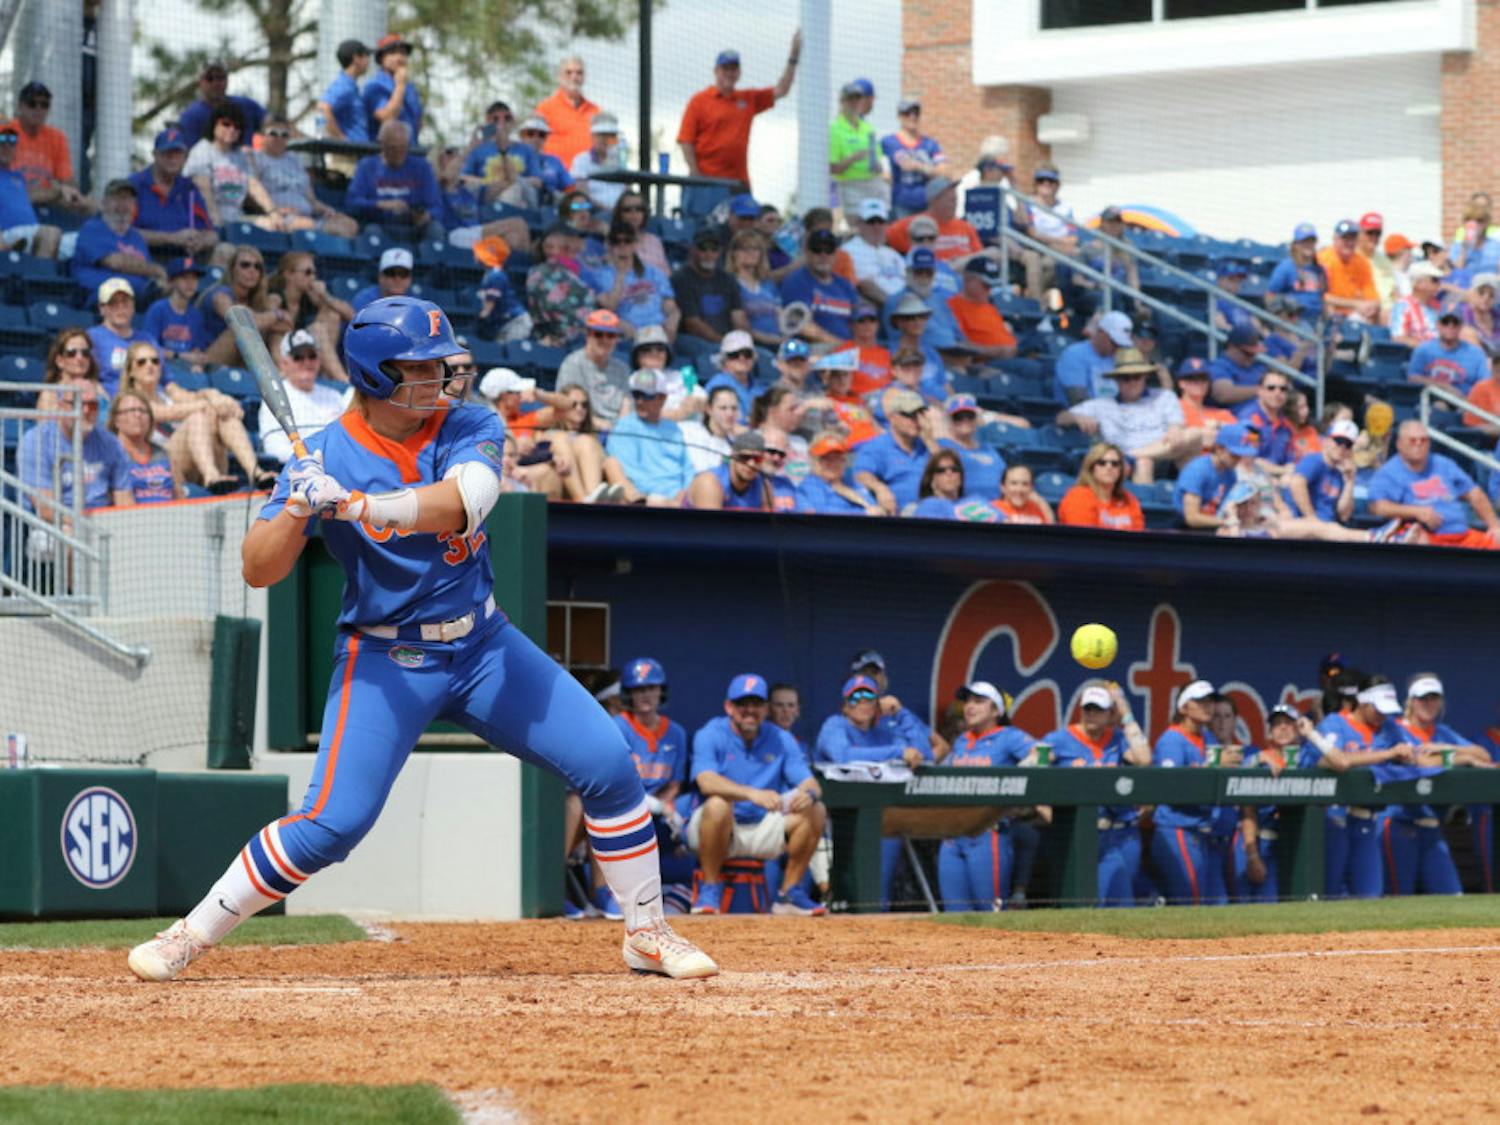 UF designated player Kendyl Lindaman hit the game winning home run in the 15th inning to give Florida a 5-2 win over Ole Miss.